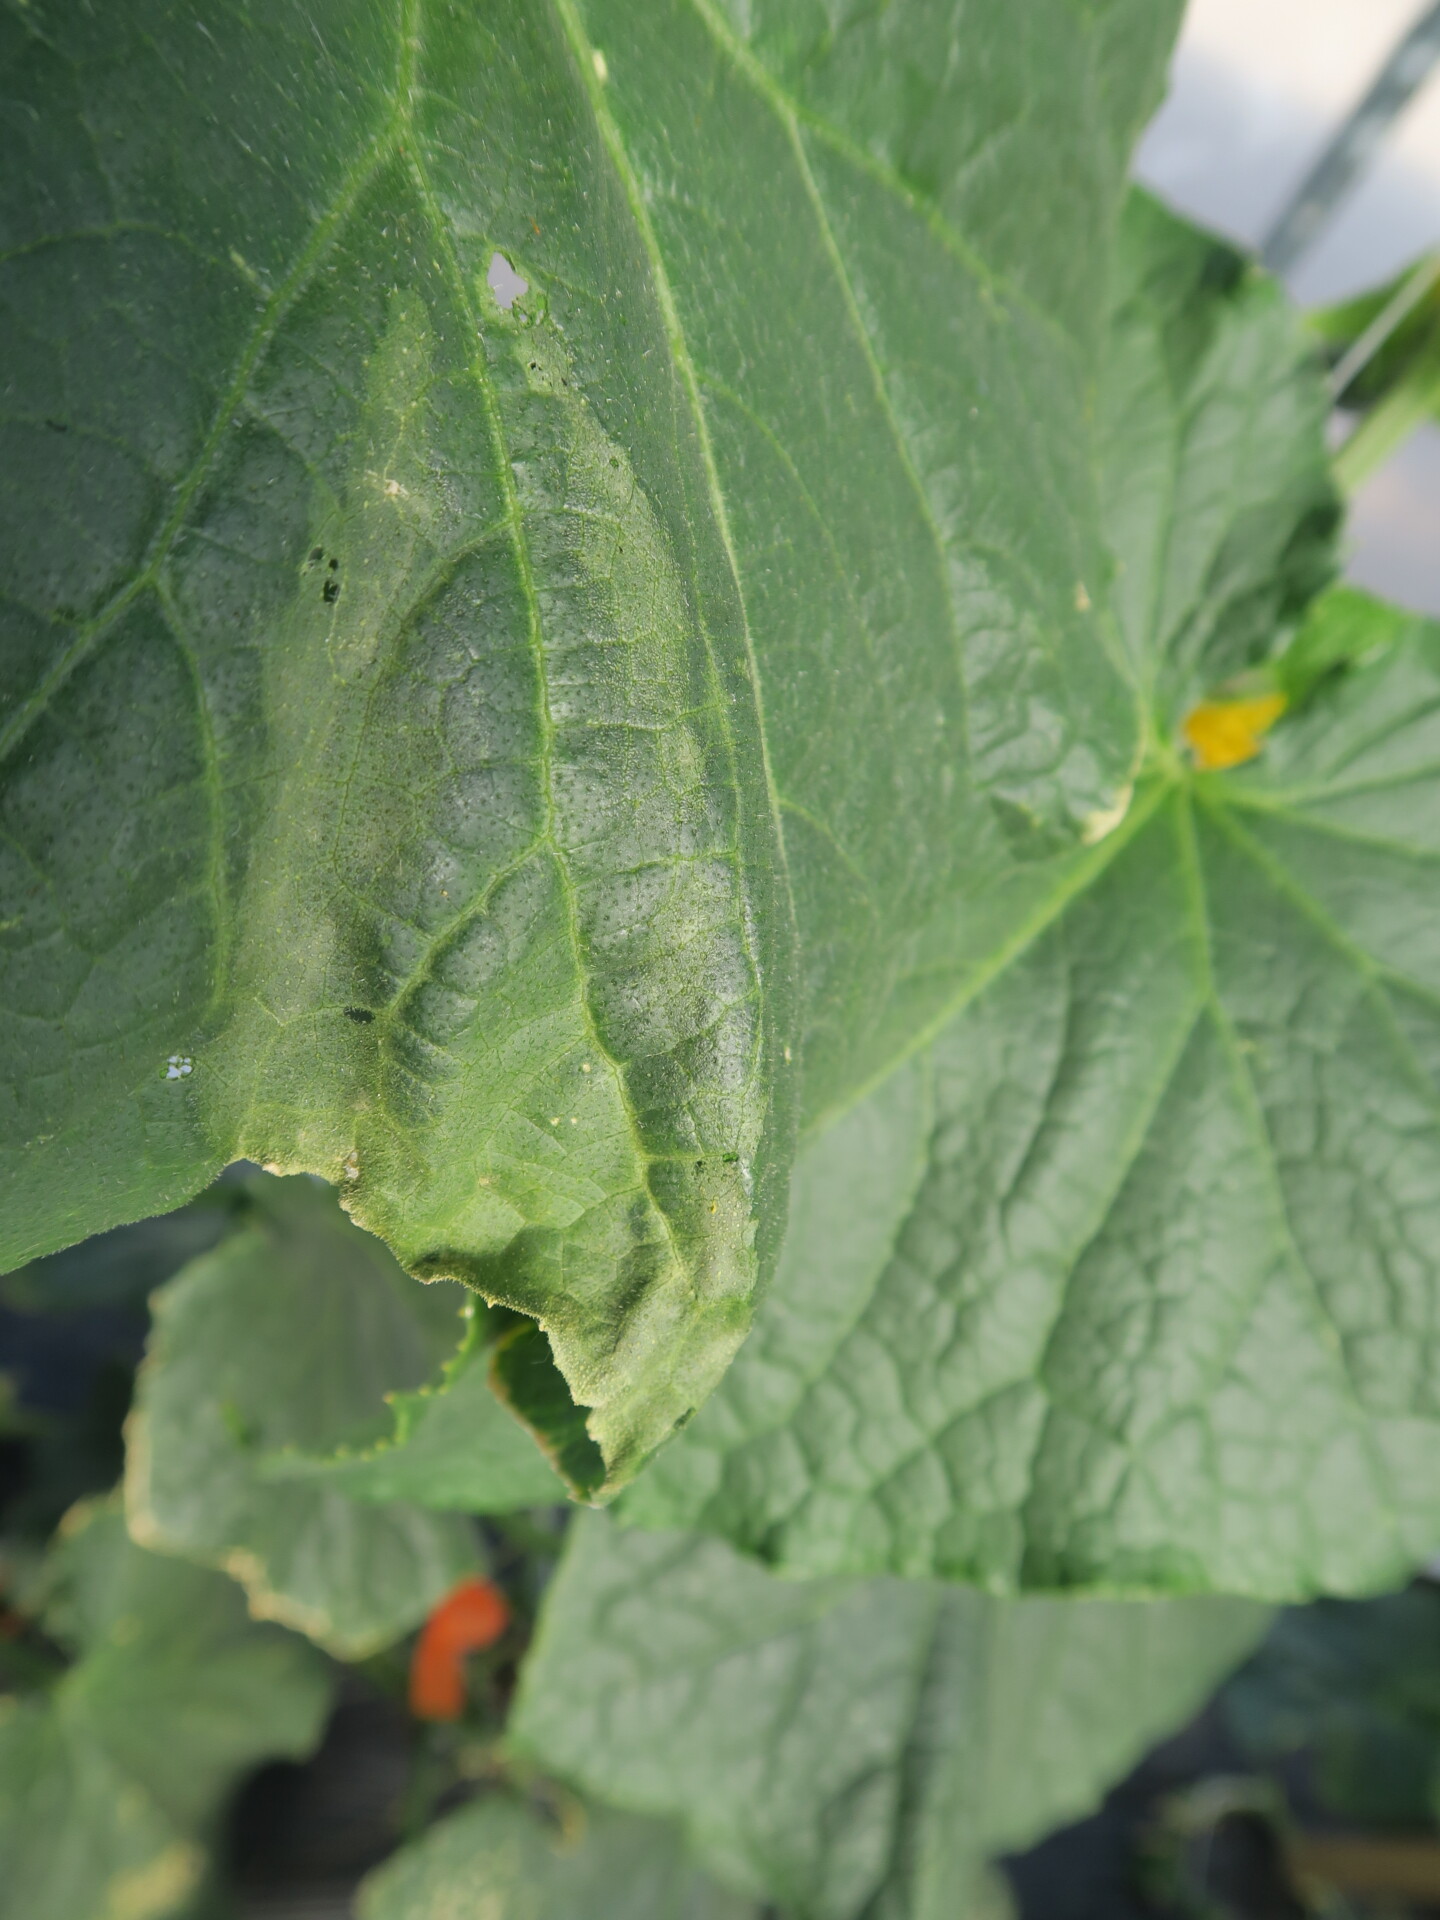 Figure 5. Striped cucumber beetle on cucumber leaf with bacterial wilt.